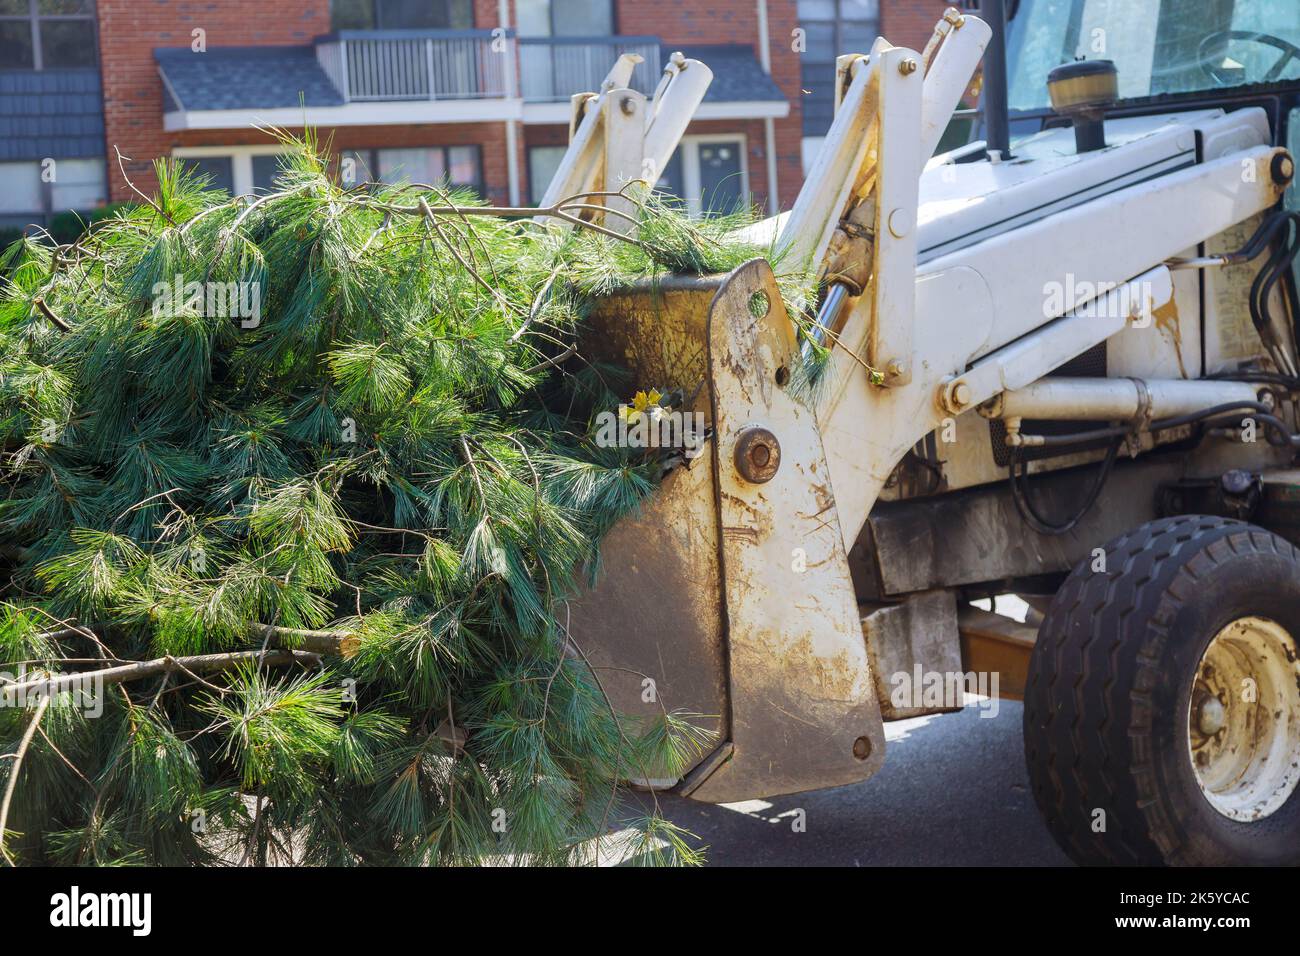 Tractor remove broken branches from trees after hurricane Stock Photo